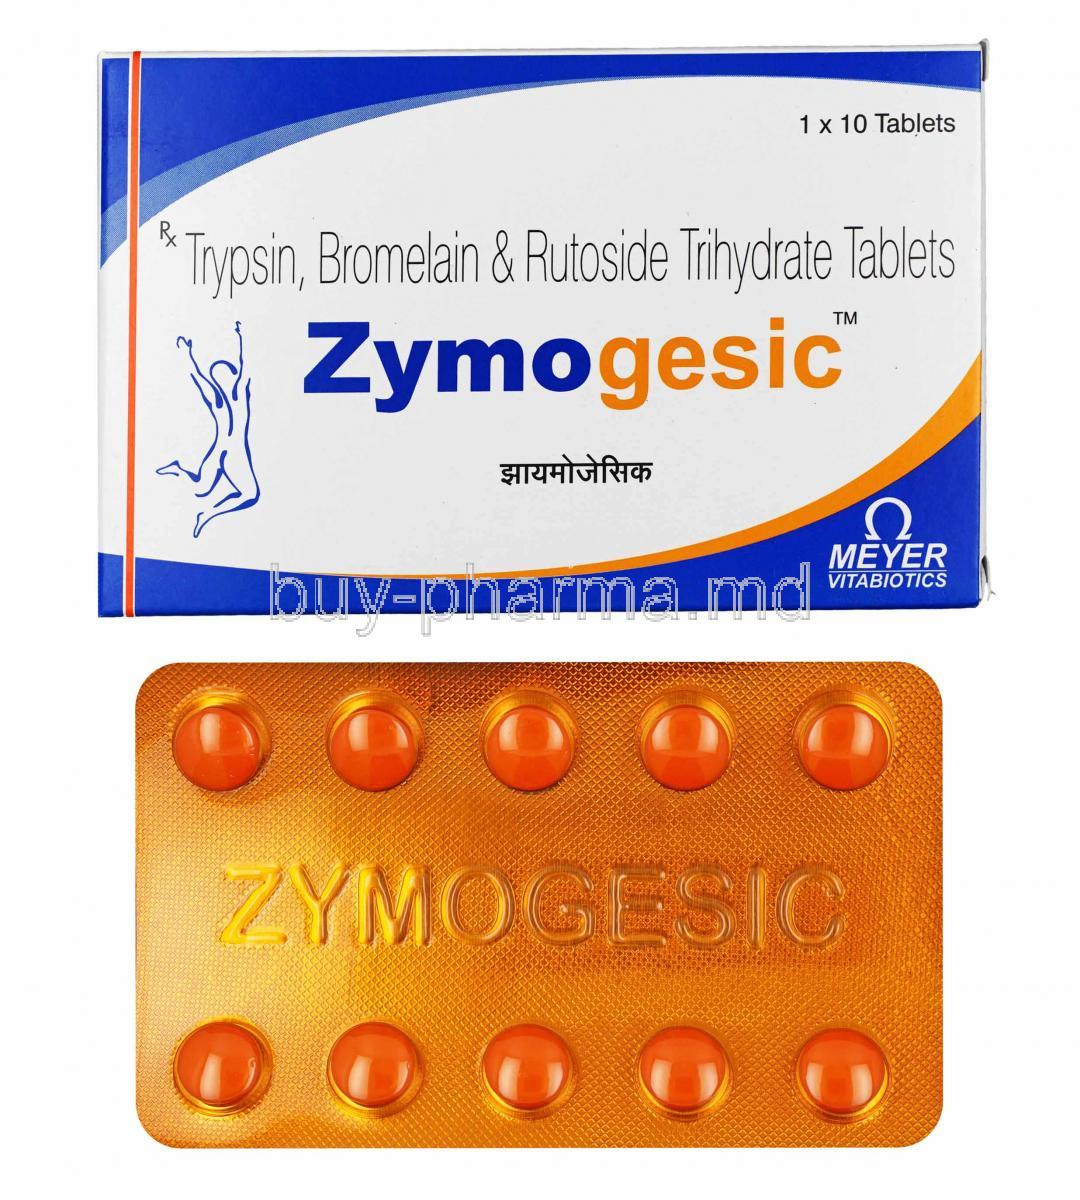 Zymogesic, Bromelain, Trypsin and Rutoside box and tablets